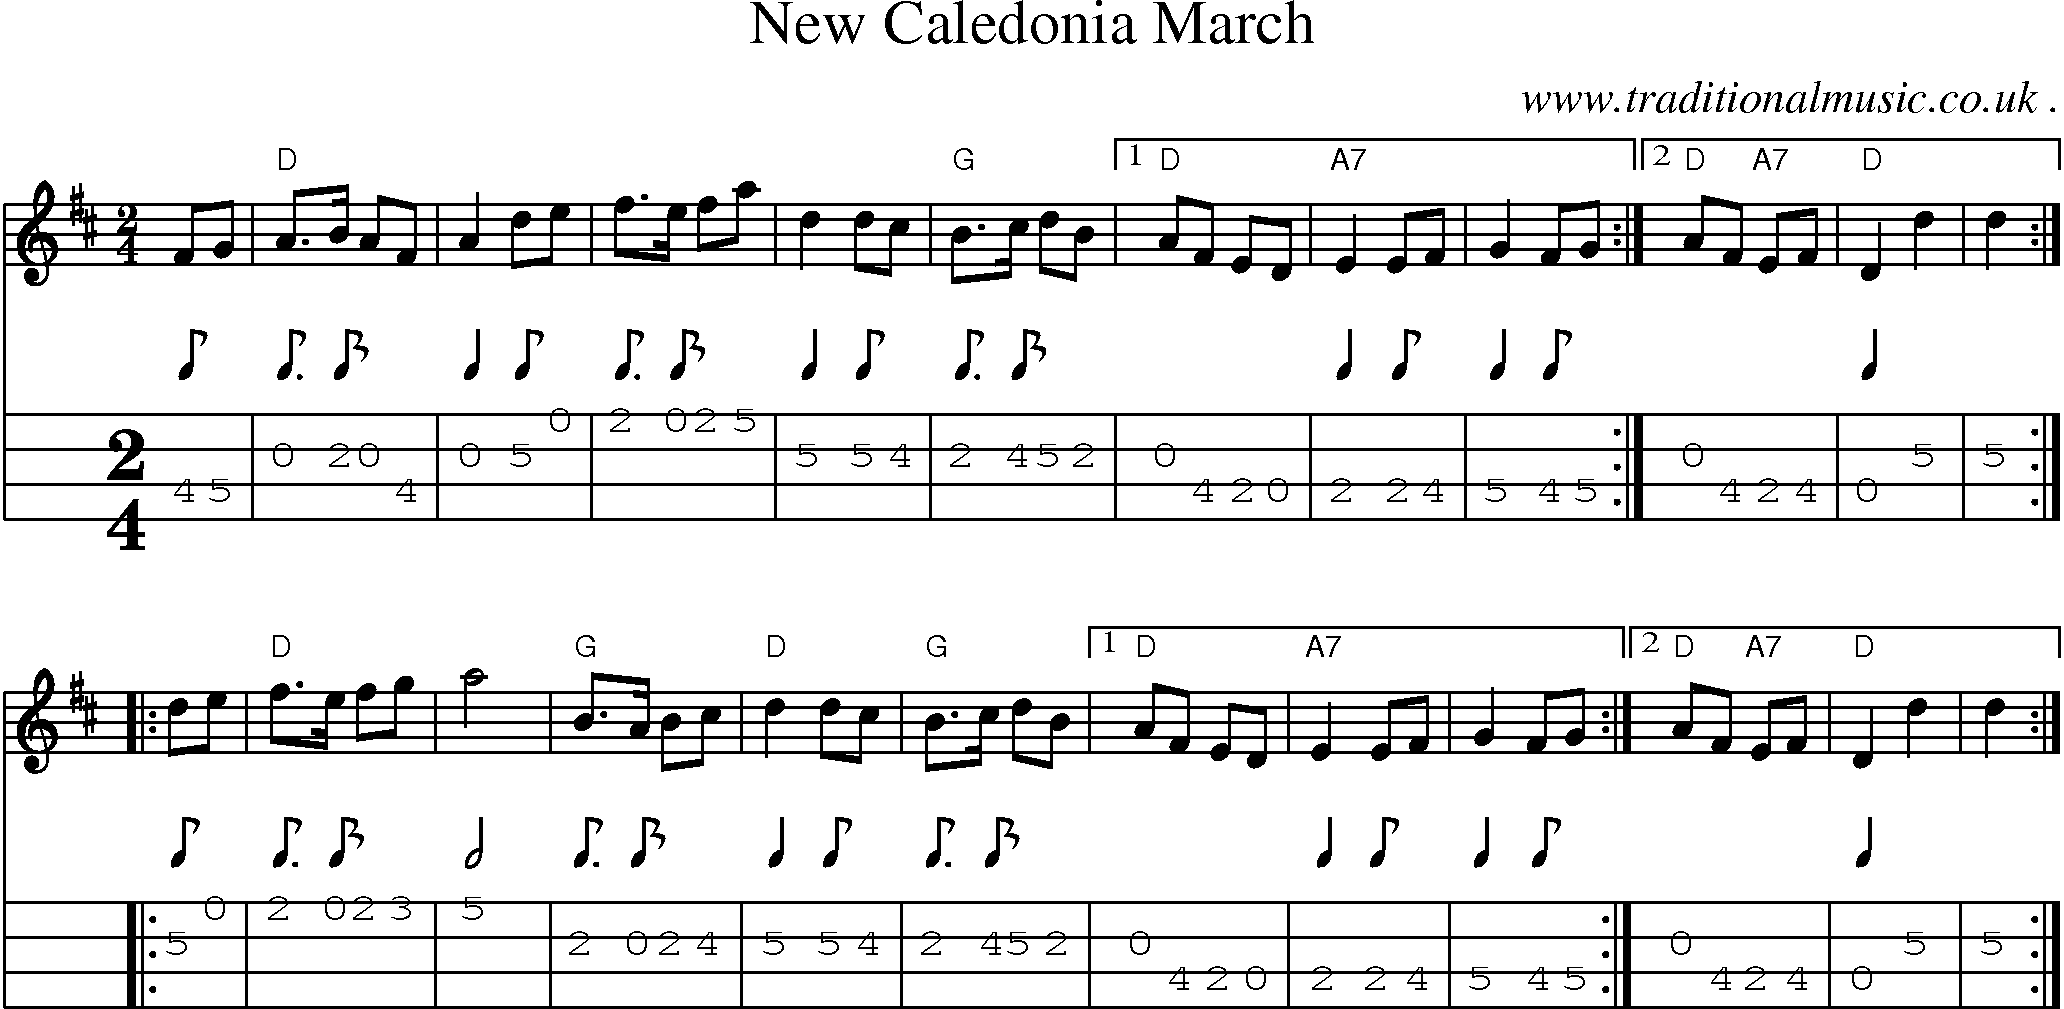 Sheet-music  score, Chords and Mandolin Tabs for New Caledonia March